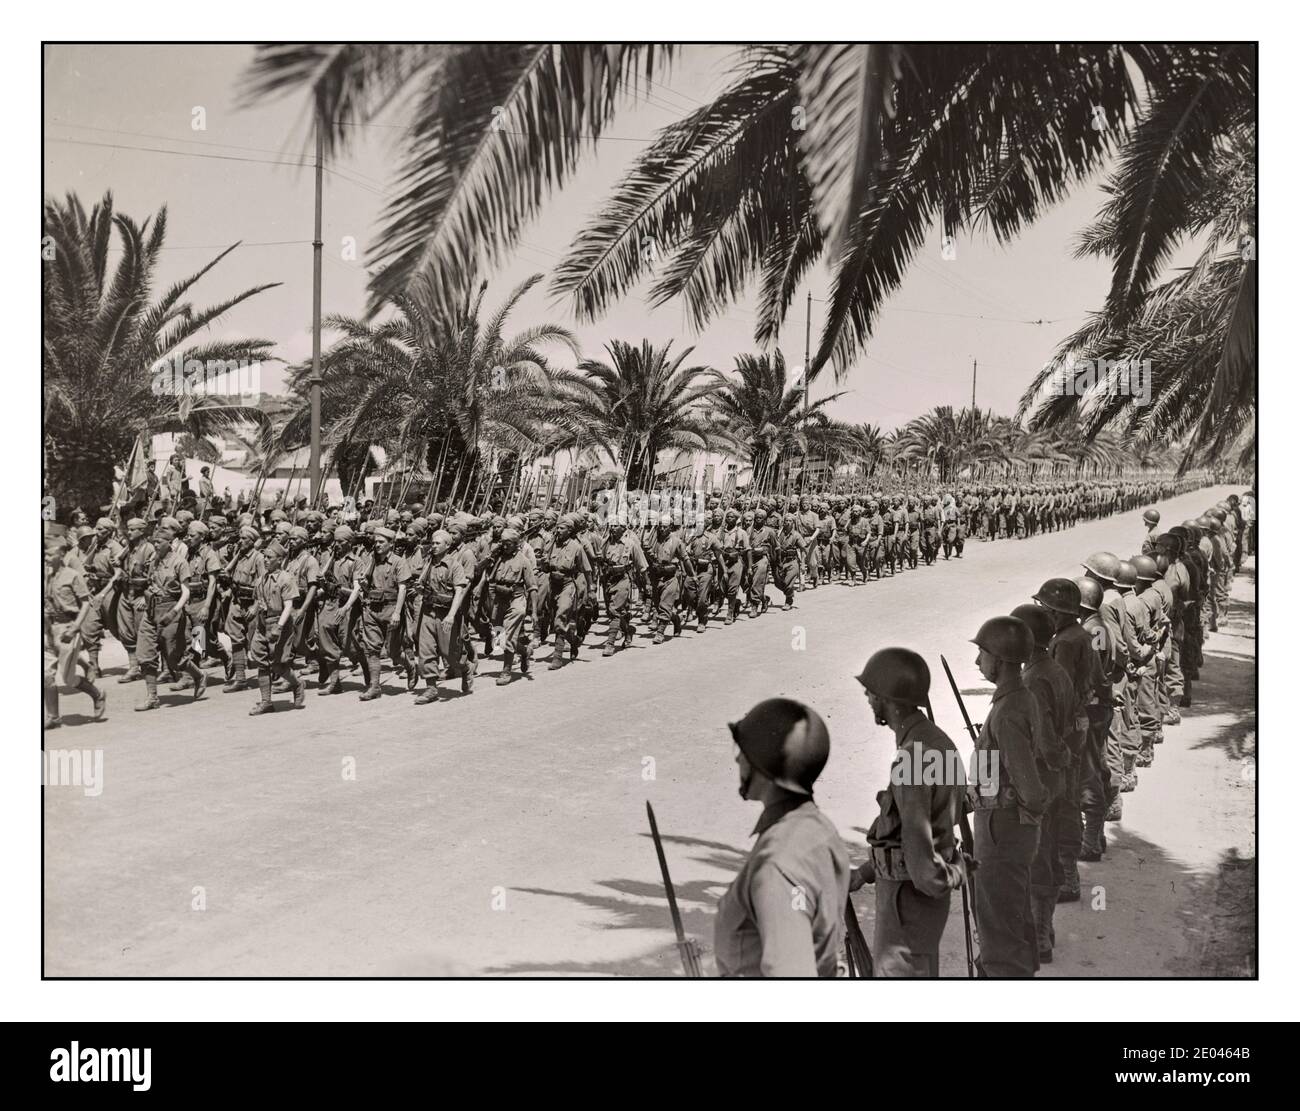 TUNIS 1943 WW2 North Africa Victory Propaganda Photo Tunis, Tunisia French soldiers marching in the allied victory parade along Avenue Gambetta. American soldiers standing at parade rest in the foreground. United States. Office of War Information. United States. Army. Signal Corps. 1943 May 20. -  World War, 1939-1945--Military personnel--French--Tunisia--Tunis -  Military parades & ceremonies--Tunisia--Tunis--1940-1950.              Axis ejected from North Africa 1943 Photo by Jack Collins for the U.S. Army Signal Corps. Stock Photo